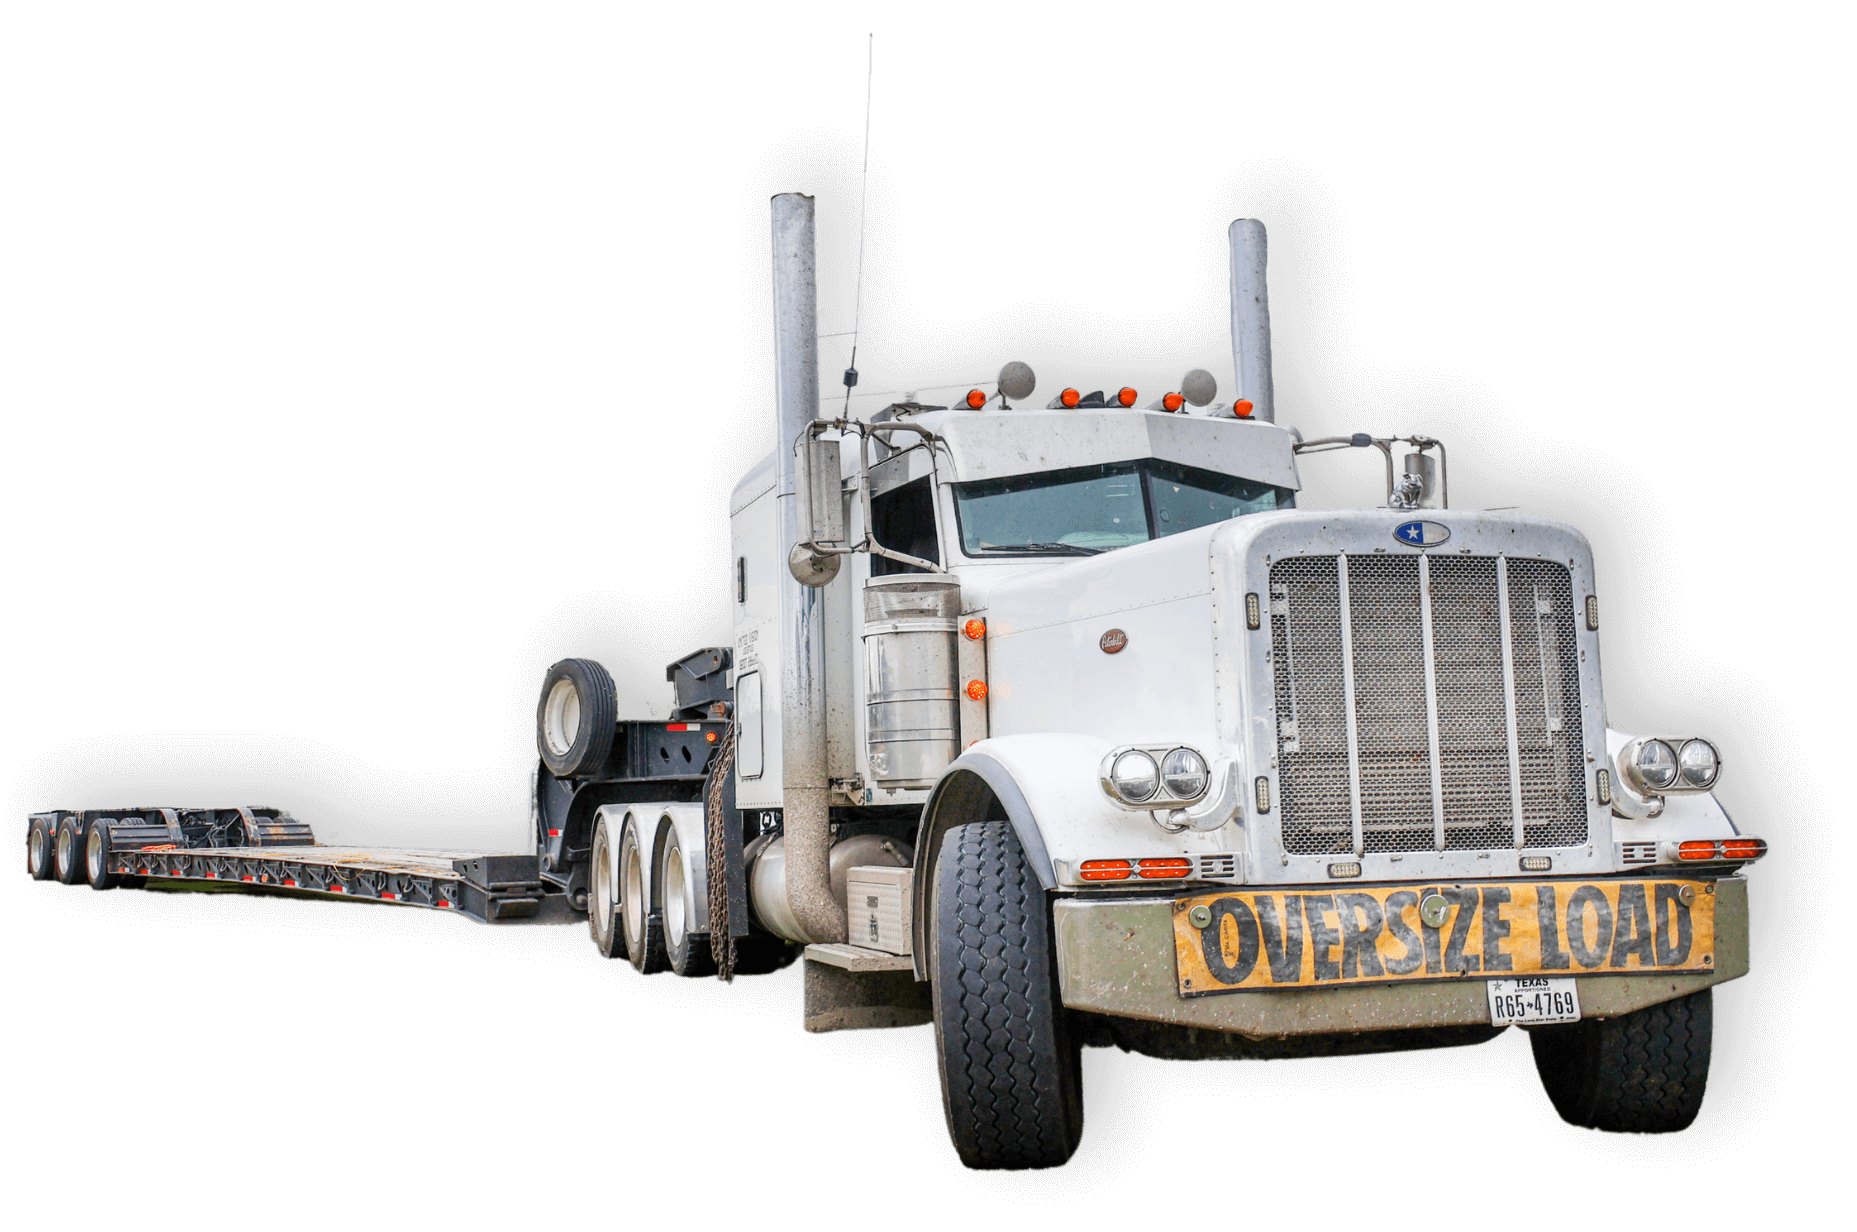 Gray heavy haul truck with trailer and oversize load banner on grill